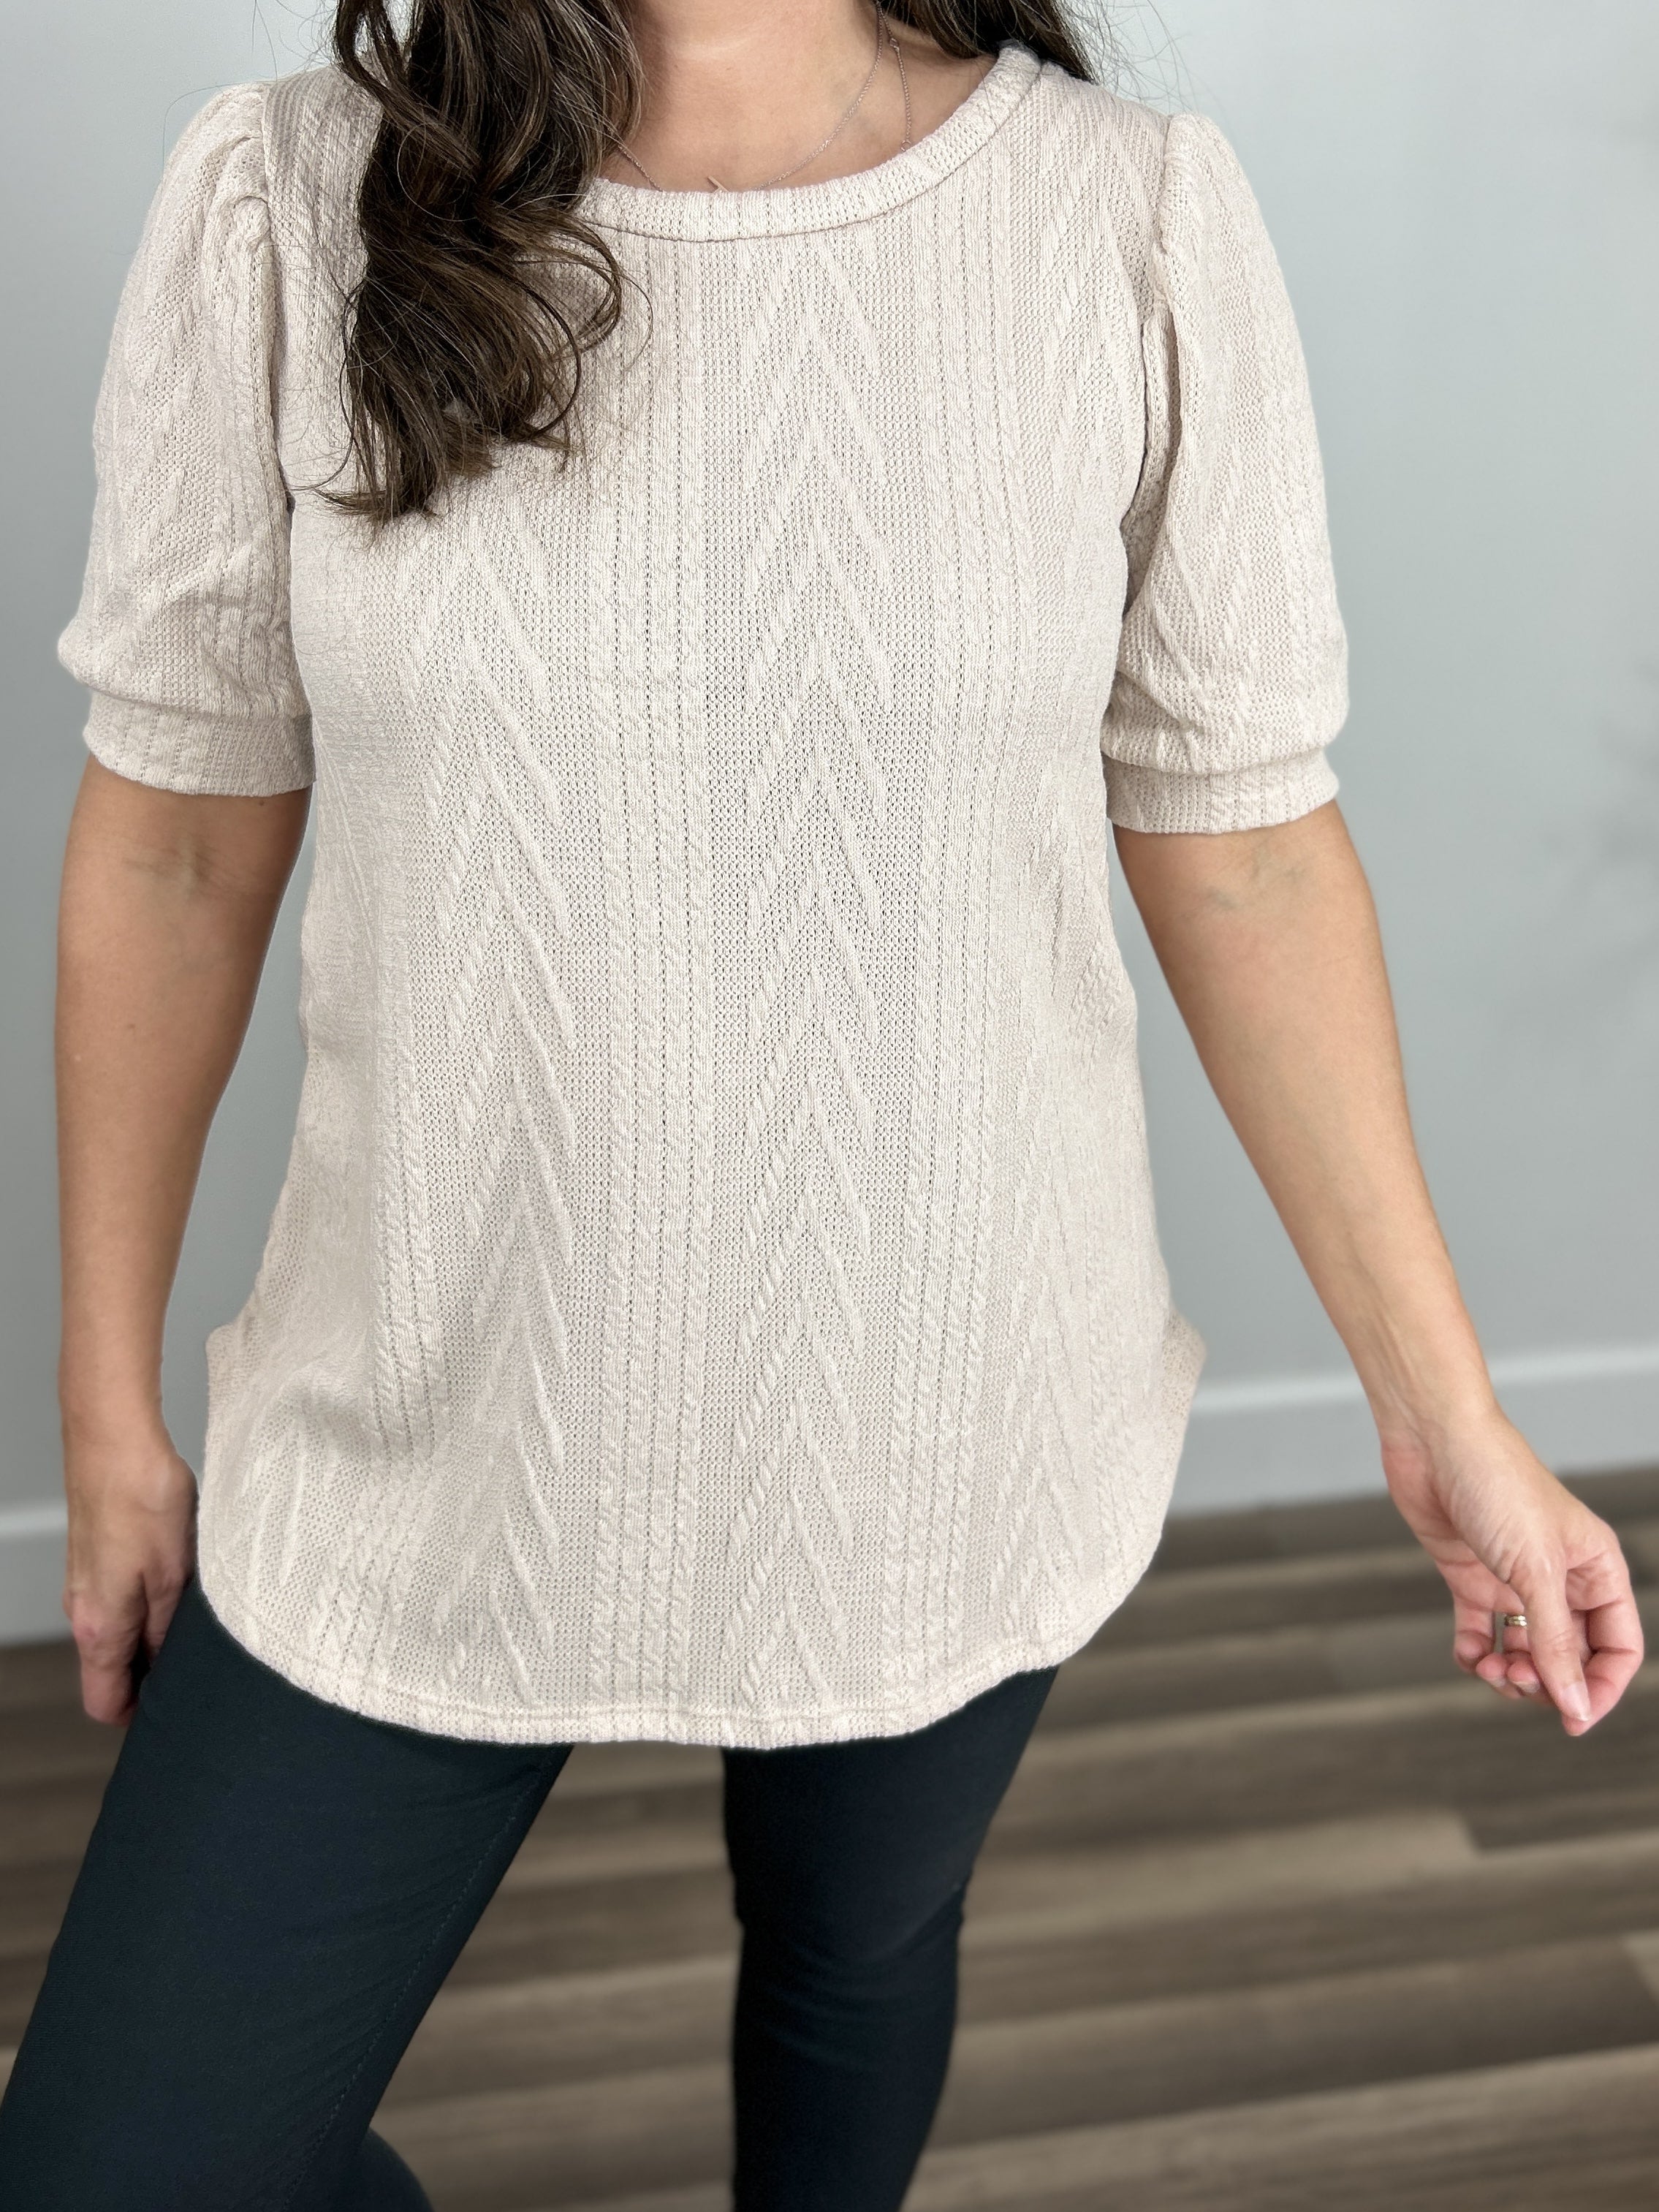 Detailed view of the cable knit fabric of the oatmeal color lacy top with a round neckline and curved hemline.